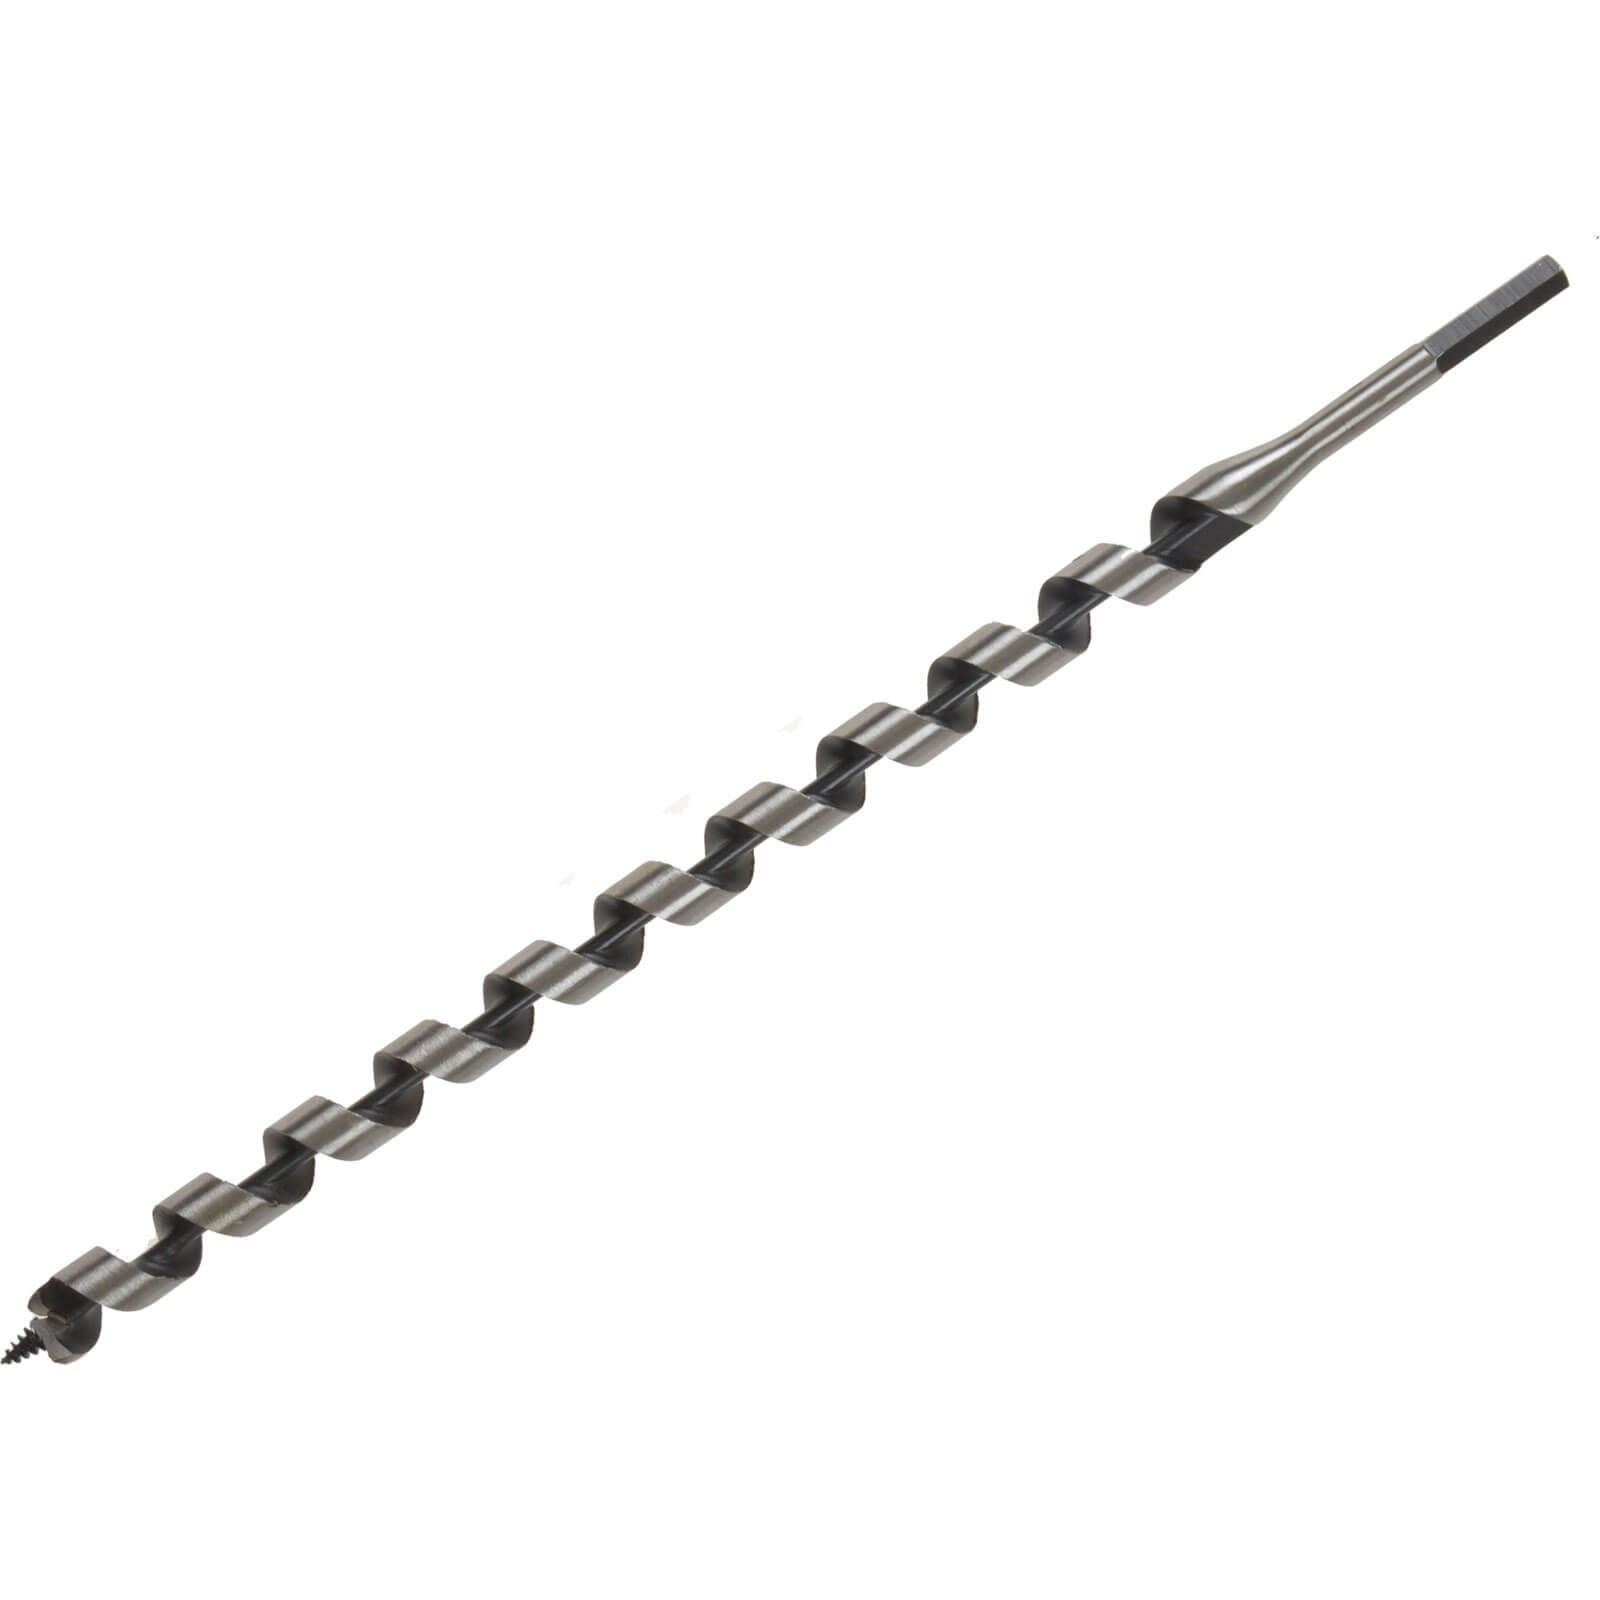 Image of Irwin Wood Auger Drill Bit 8mm 400mm